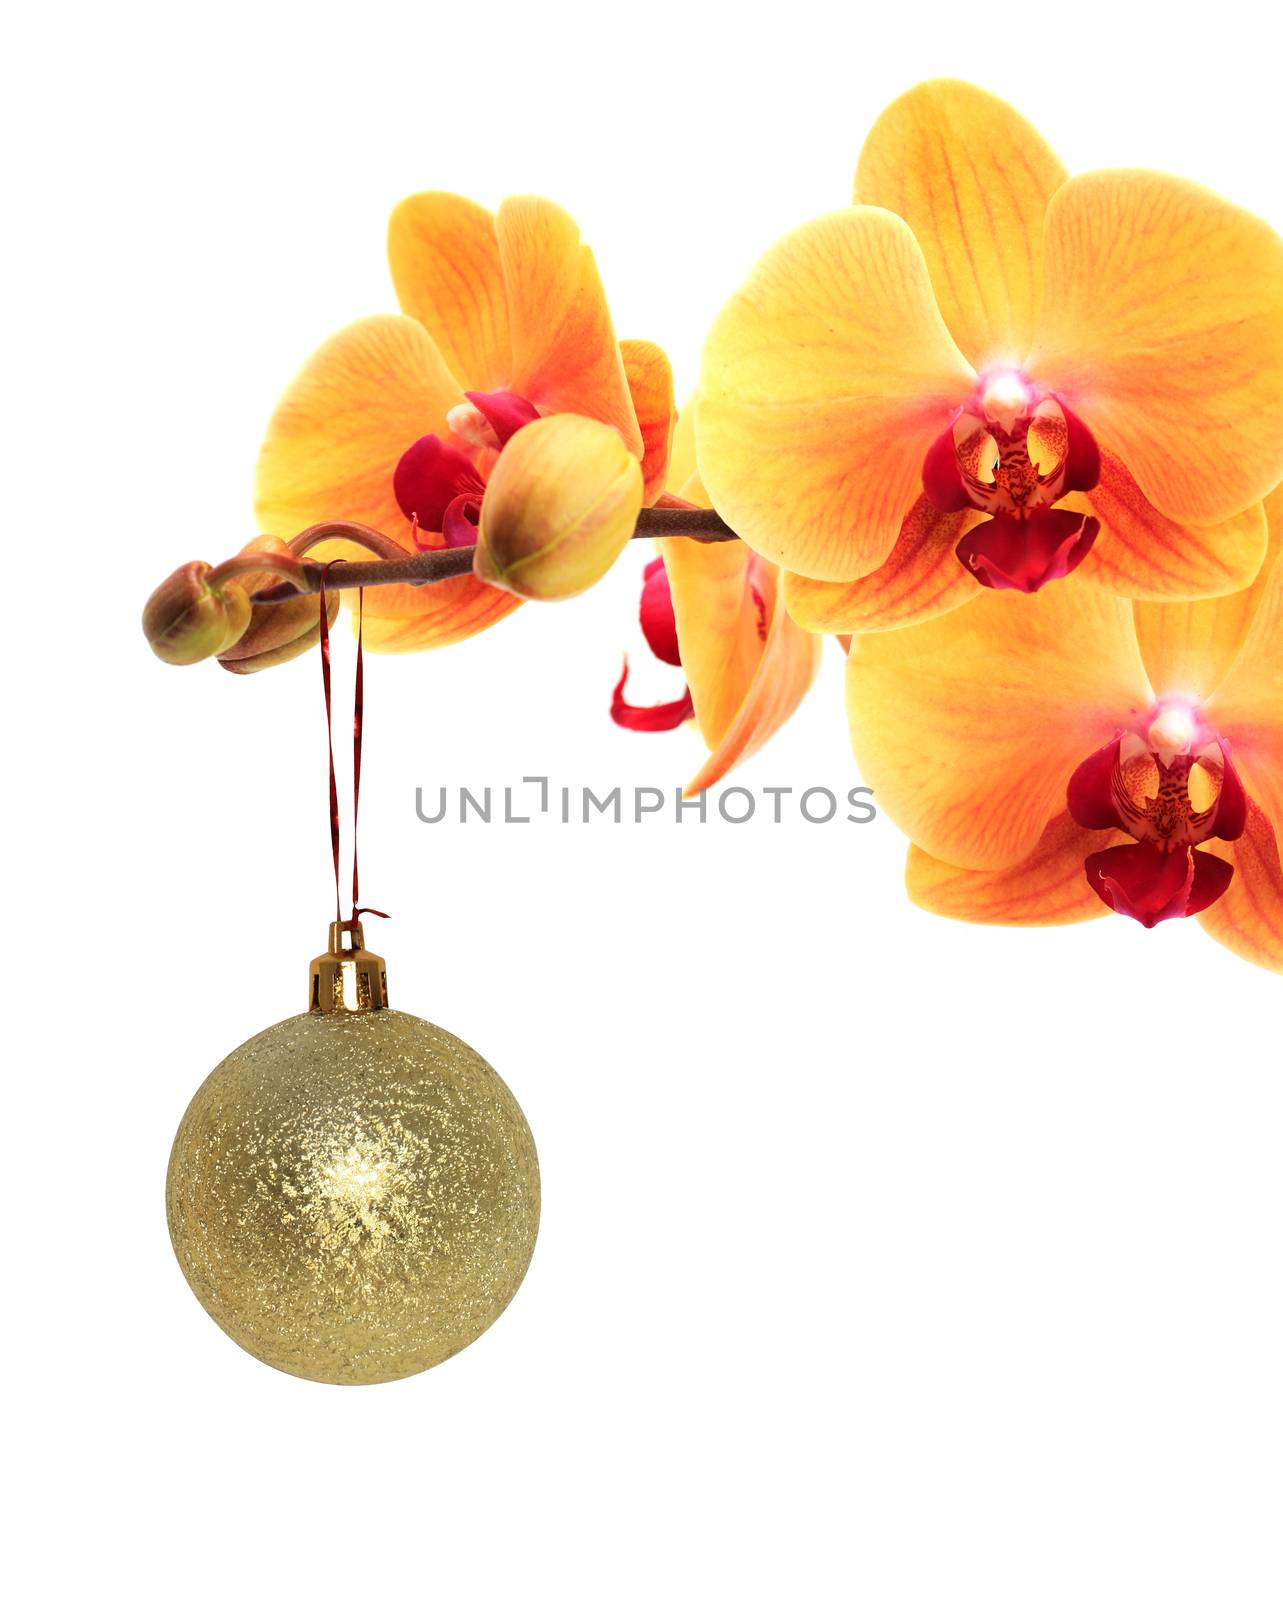 Christmas Decoration With Orchid by kvkirillov